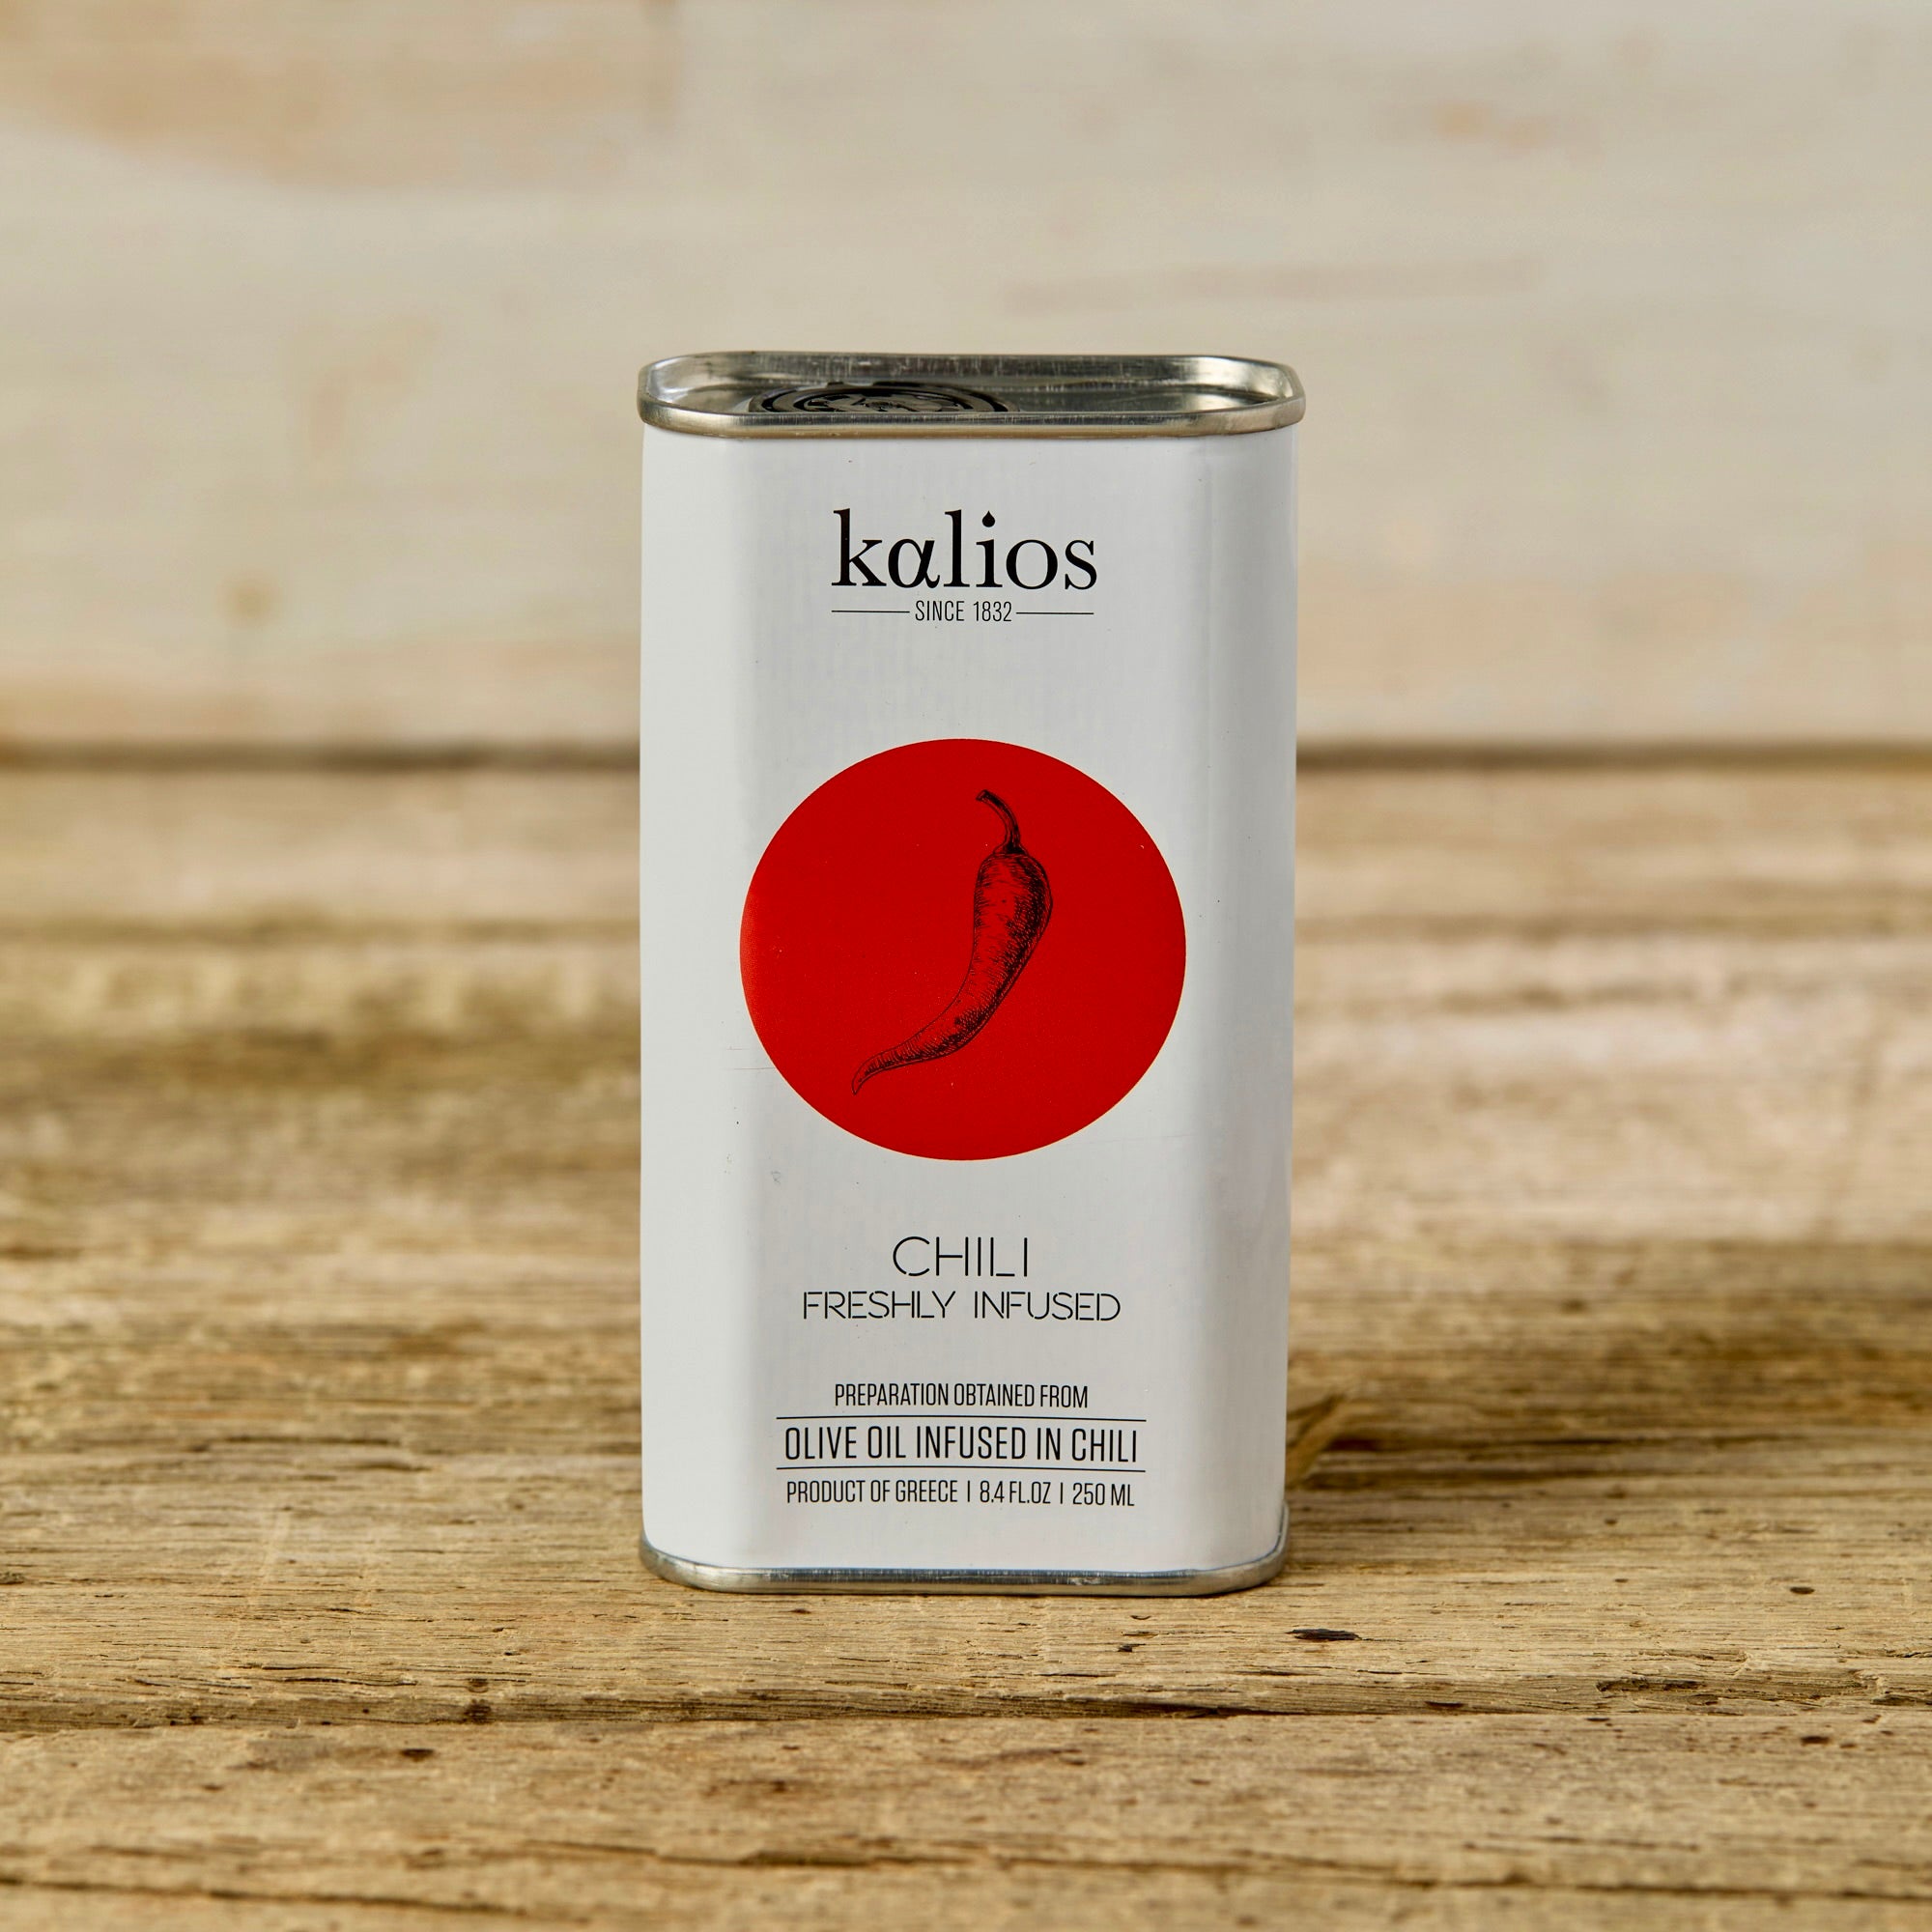 chili infused olive oil by Kalios